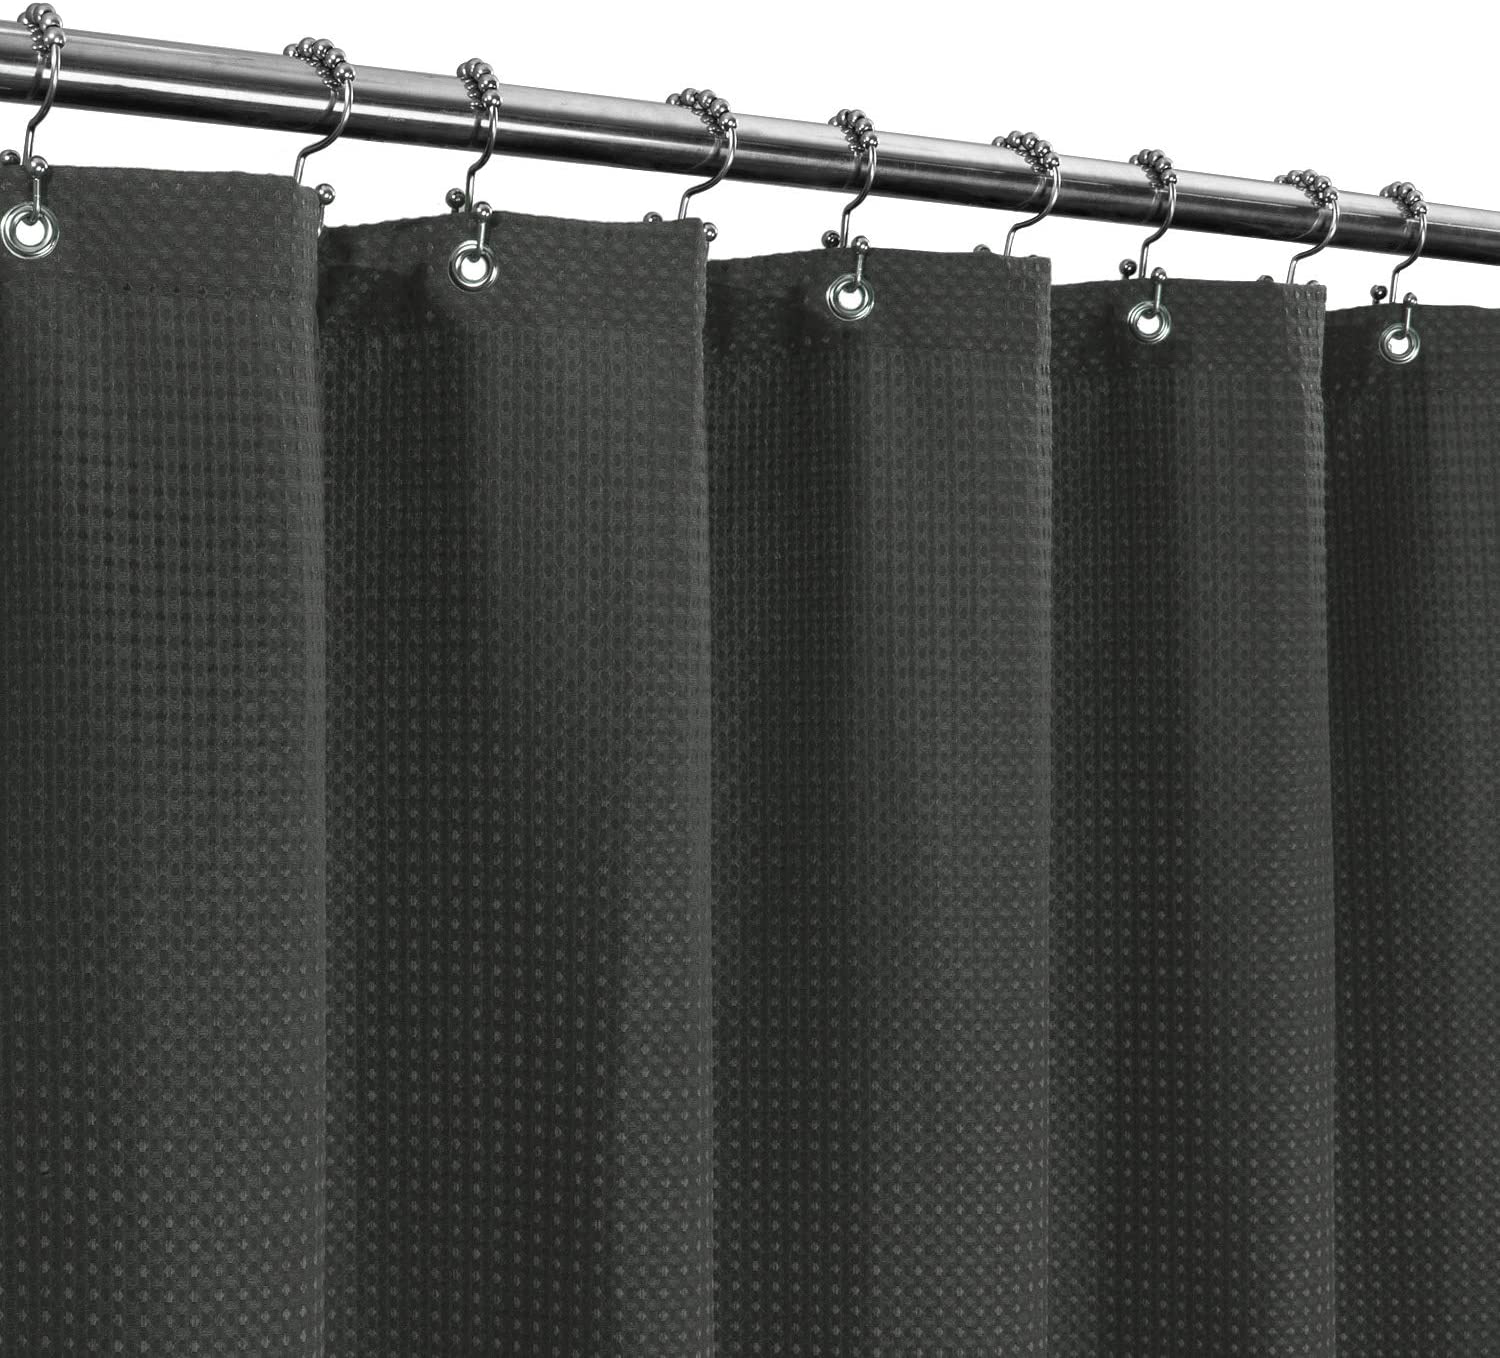 Waffle Weave 230 Stall Shower Curtain Fabric 36 x 72 inches Hotel Luxury Spa